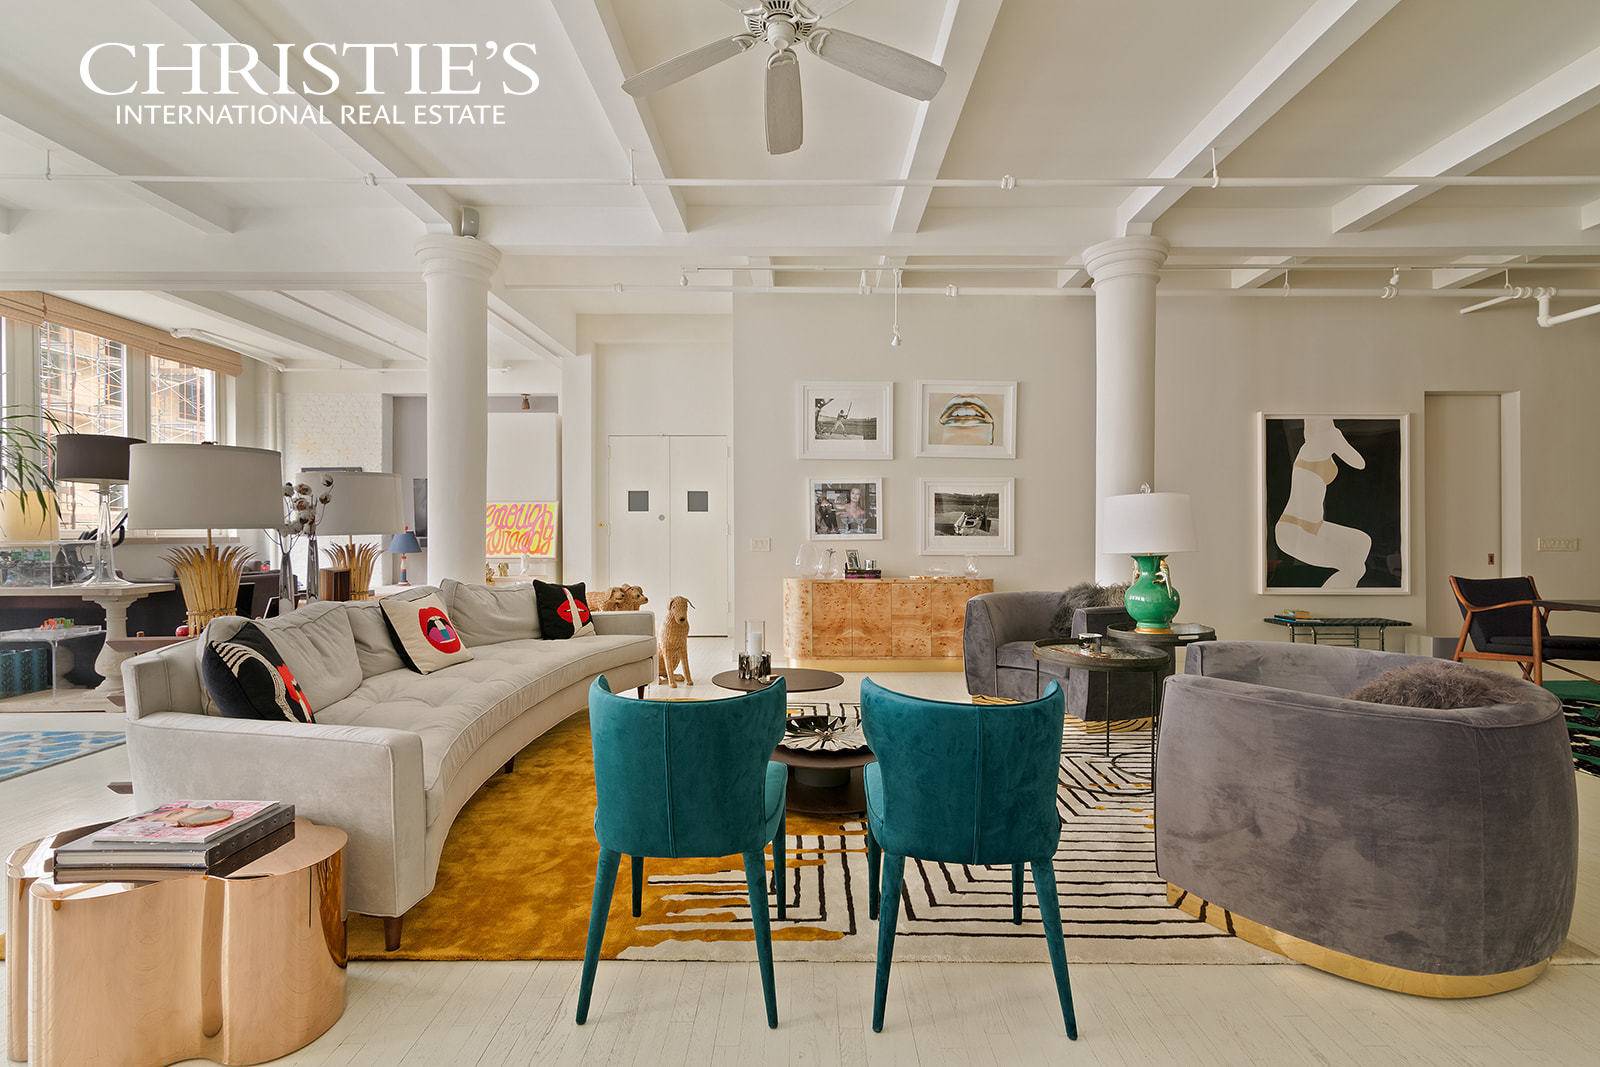 Available furnished or unfurnished A private keyed elevator opens into this expansive, full floor loft located at 32 West 20th Street.